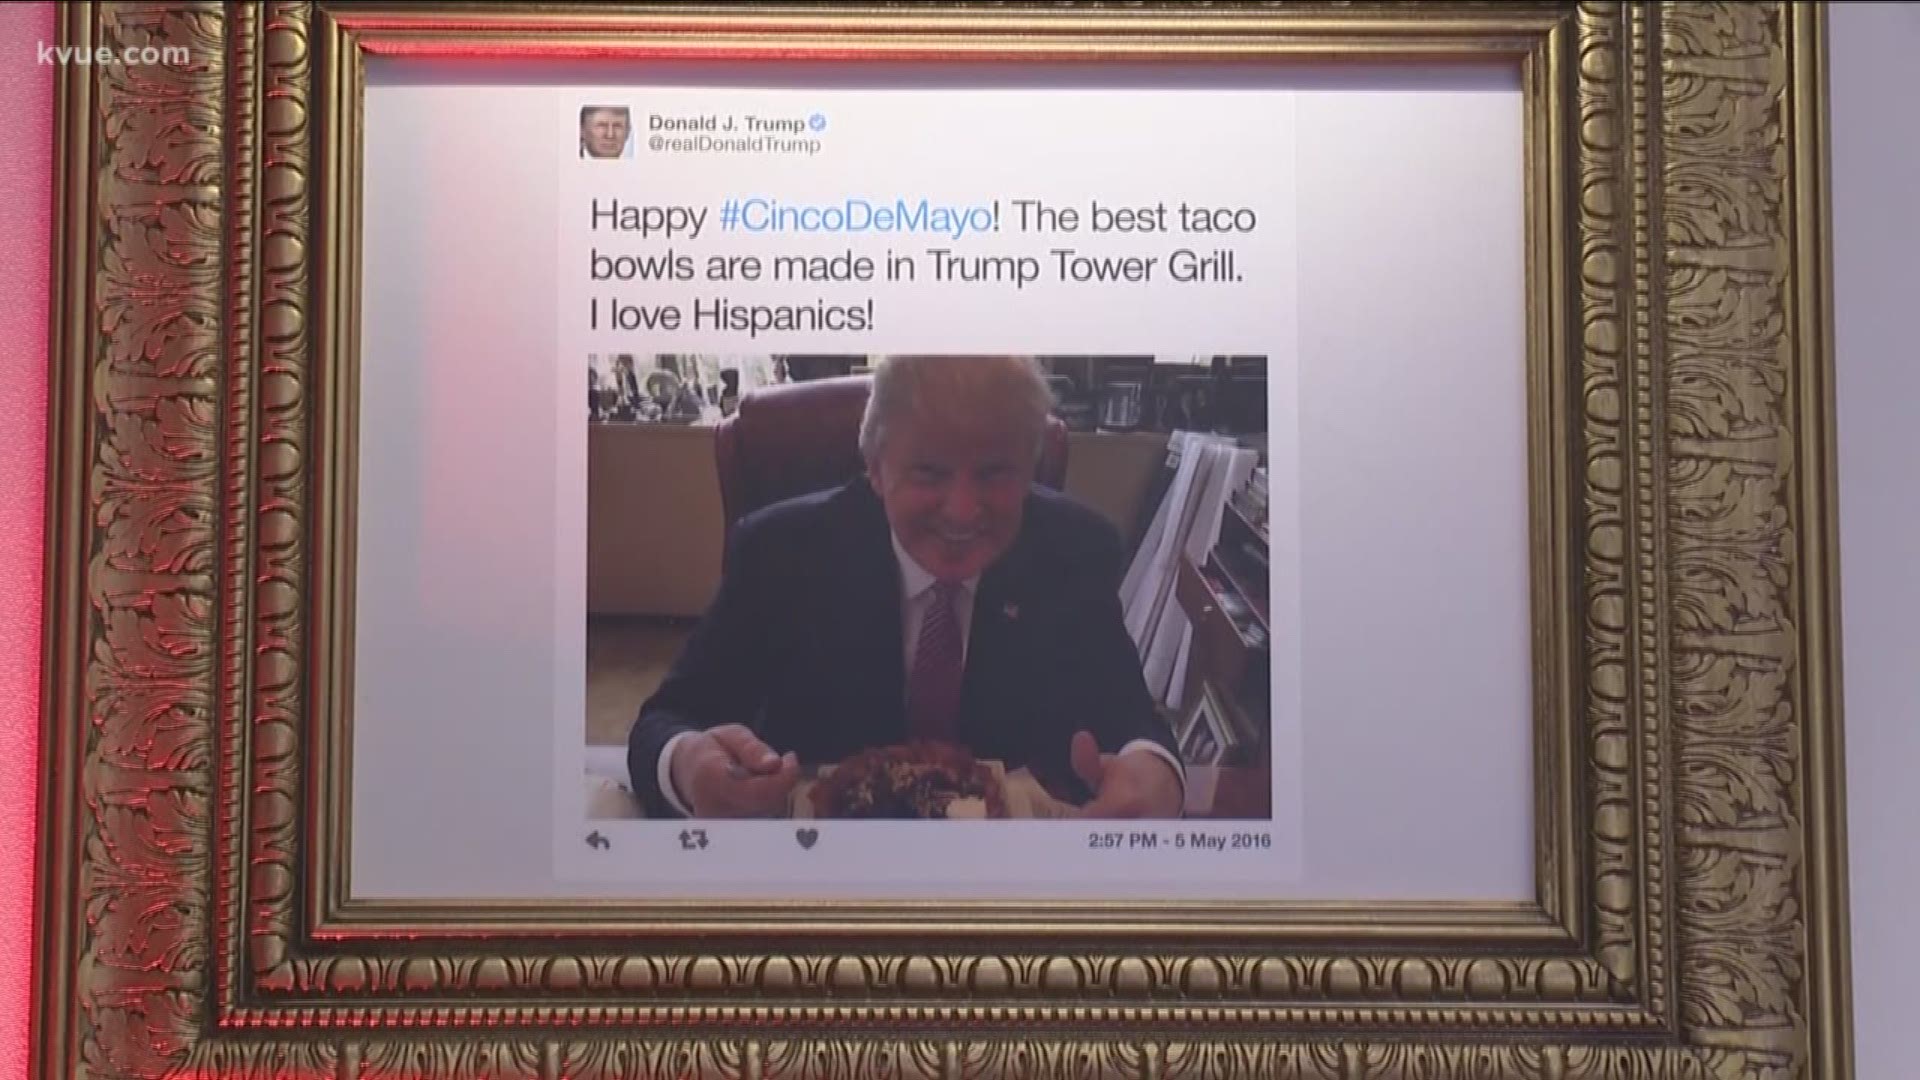 Fans of Comedy Central's "The Daily Show" will want to check out their "Donald J. Trump Presidential Twitter Library" this weekend during SXSW.